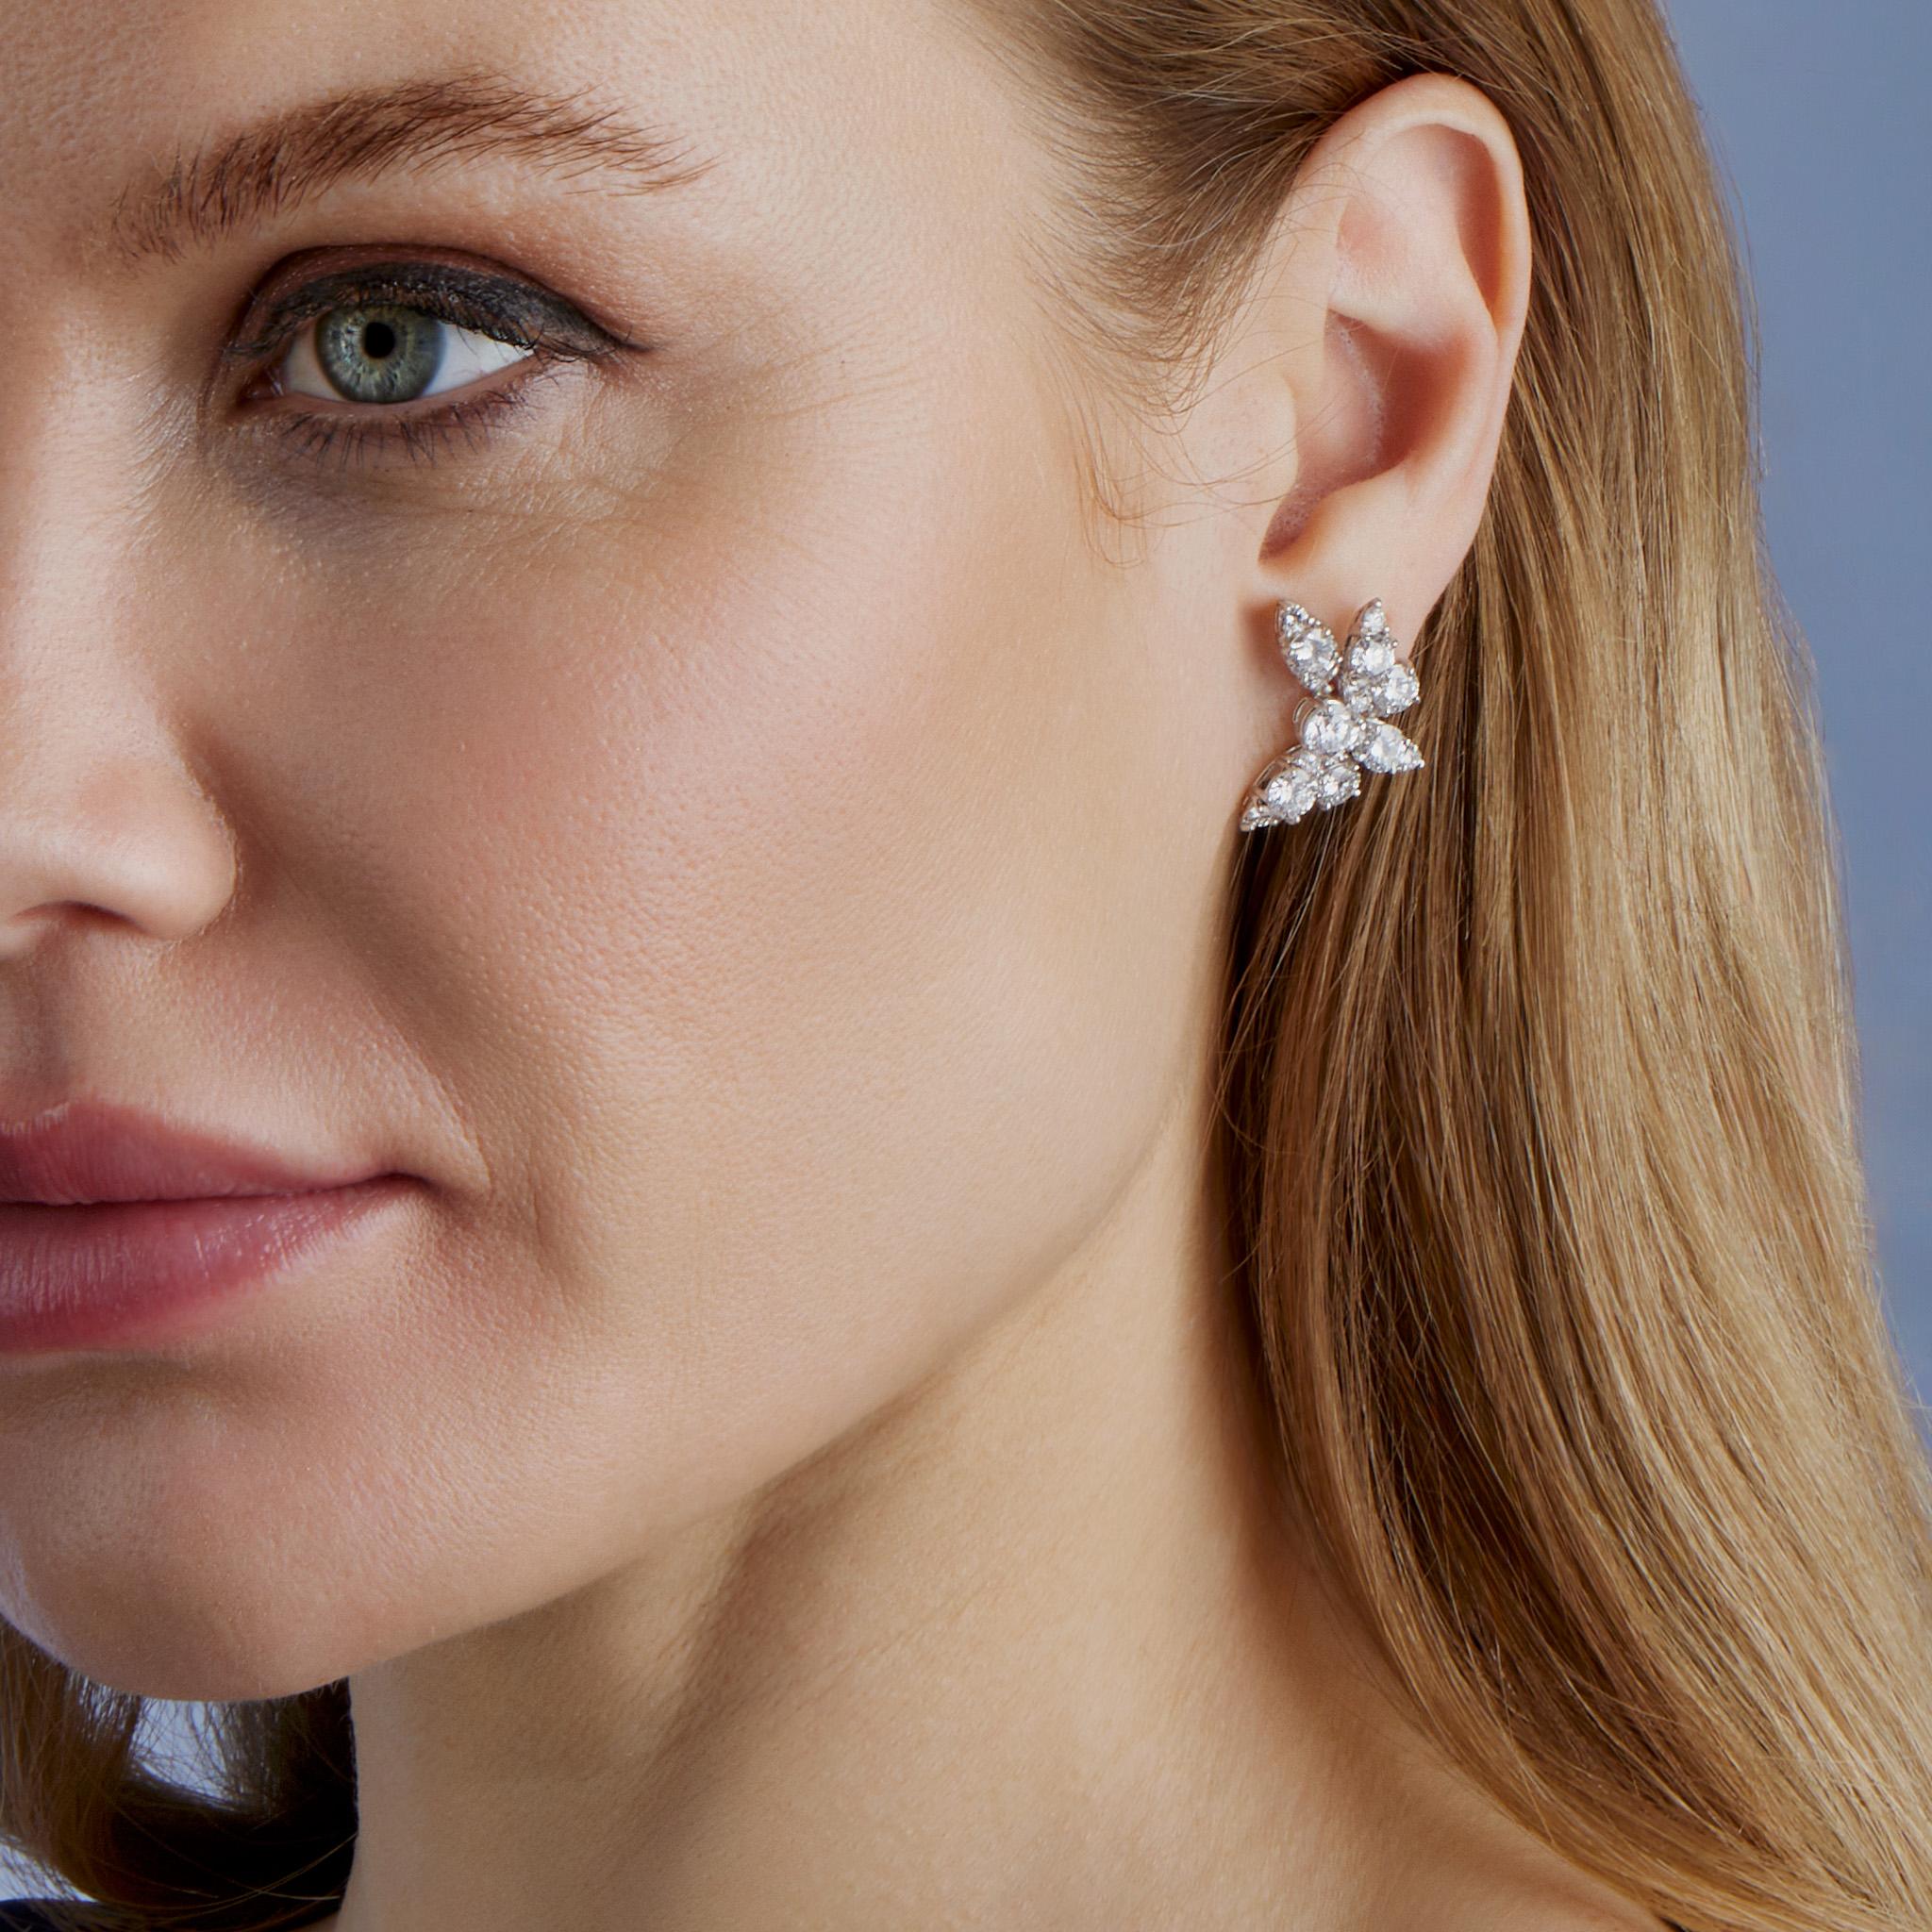 Created in the 1960s, these Van Cleef & Arpels earrings are composed of platinum and approximately 7.00 carats of diamonds. Each earring with omega clip back is designed as a blossom. Expertly modeled by Van Cleef & Arpels' jewelers for both beauty